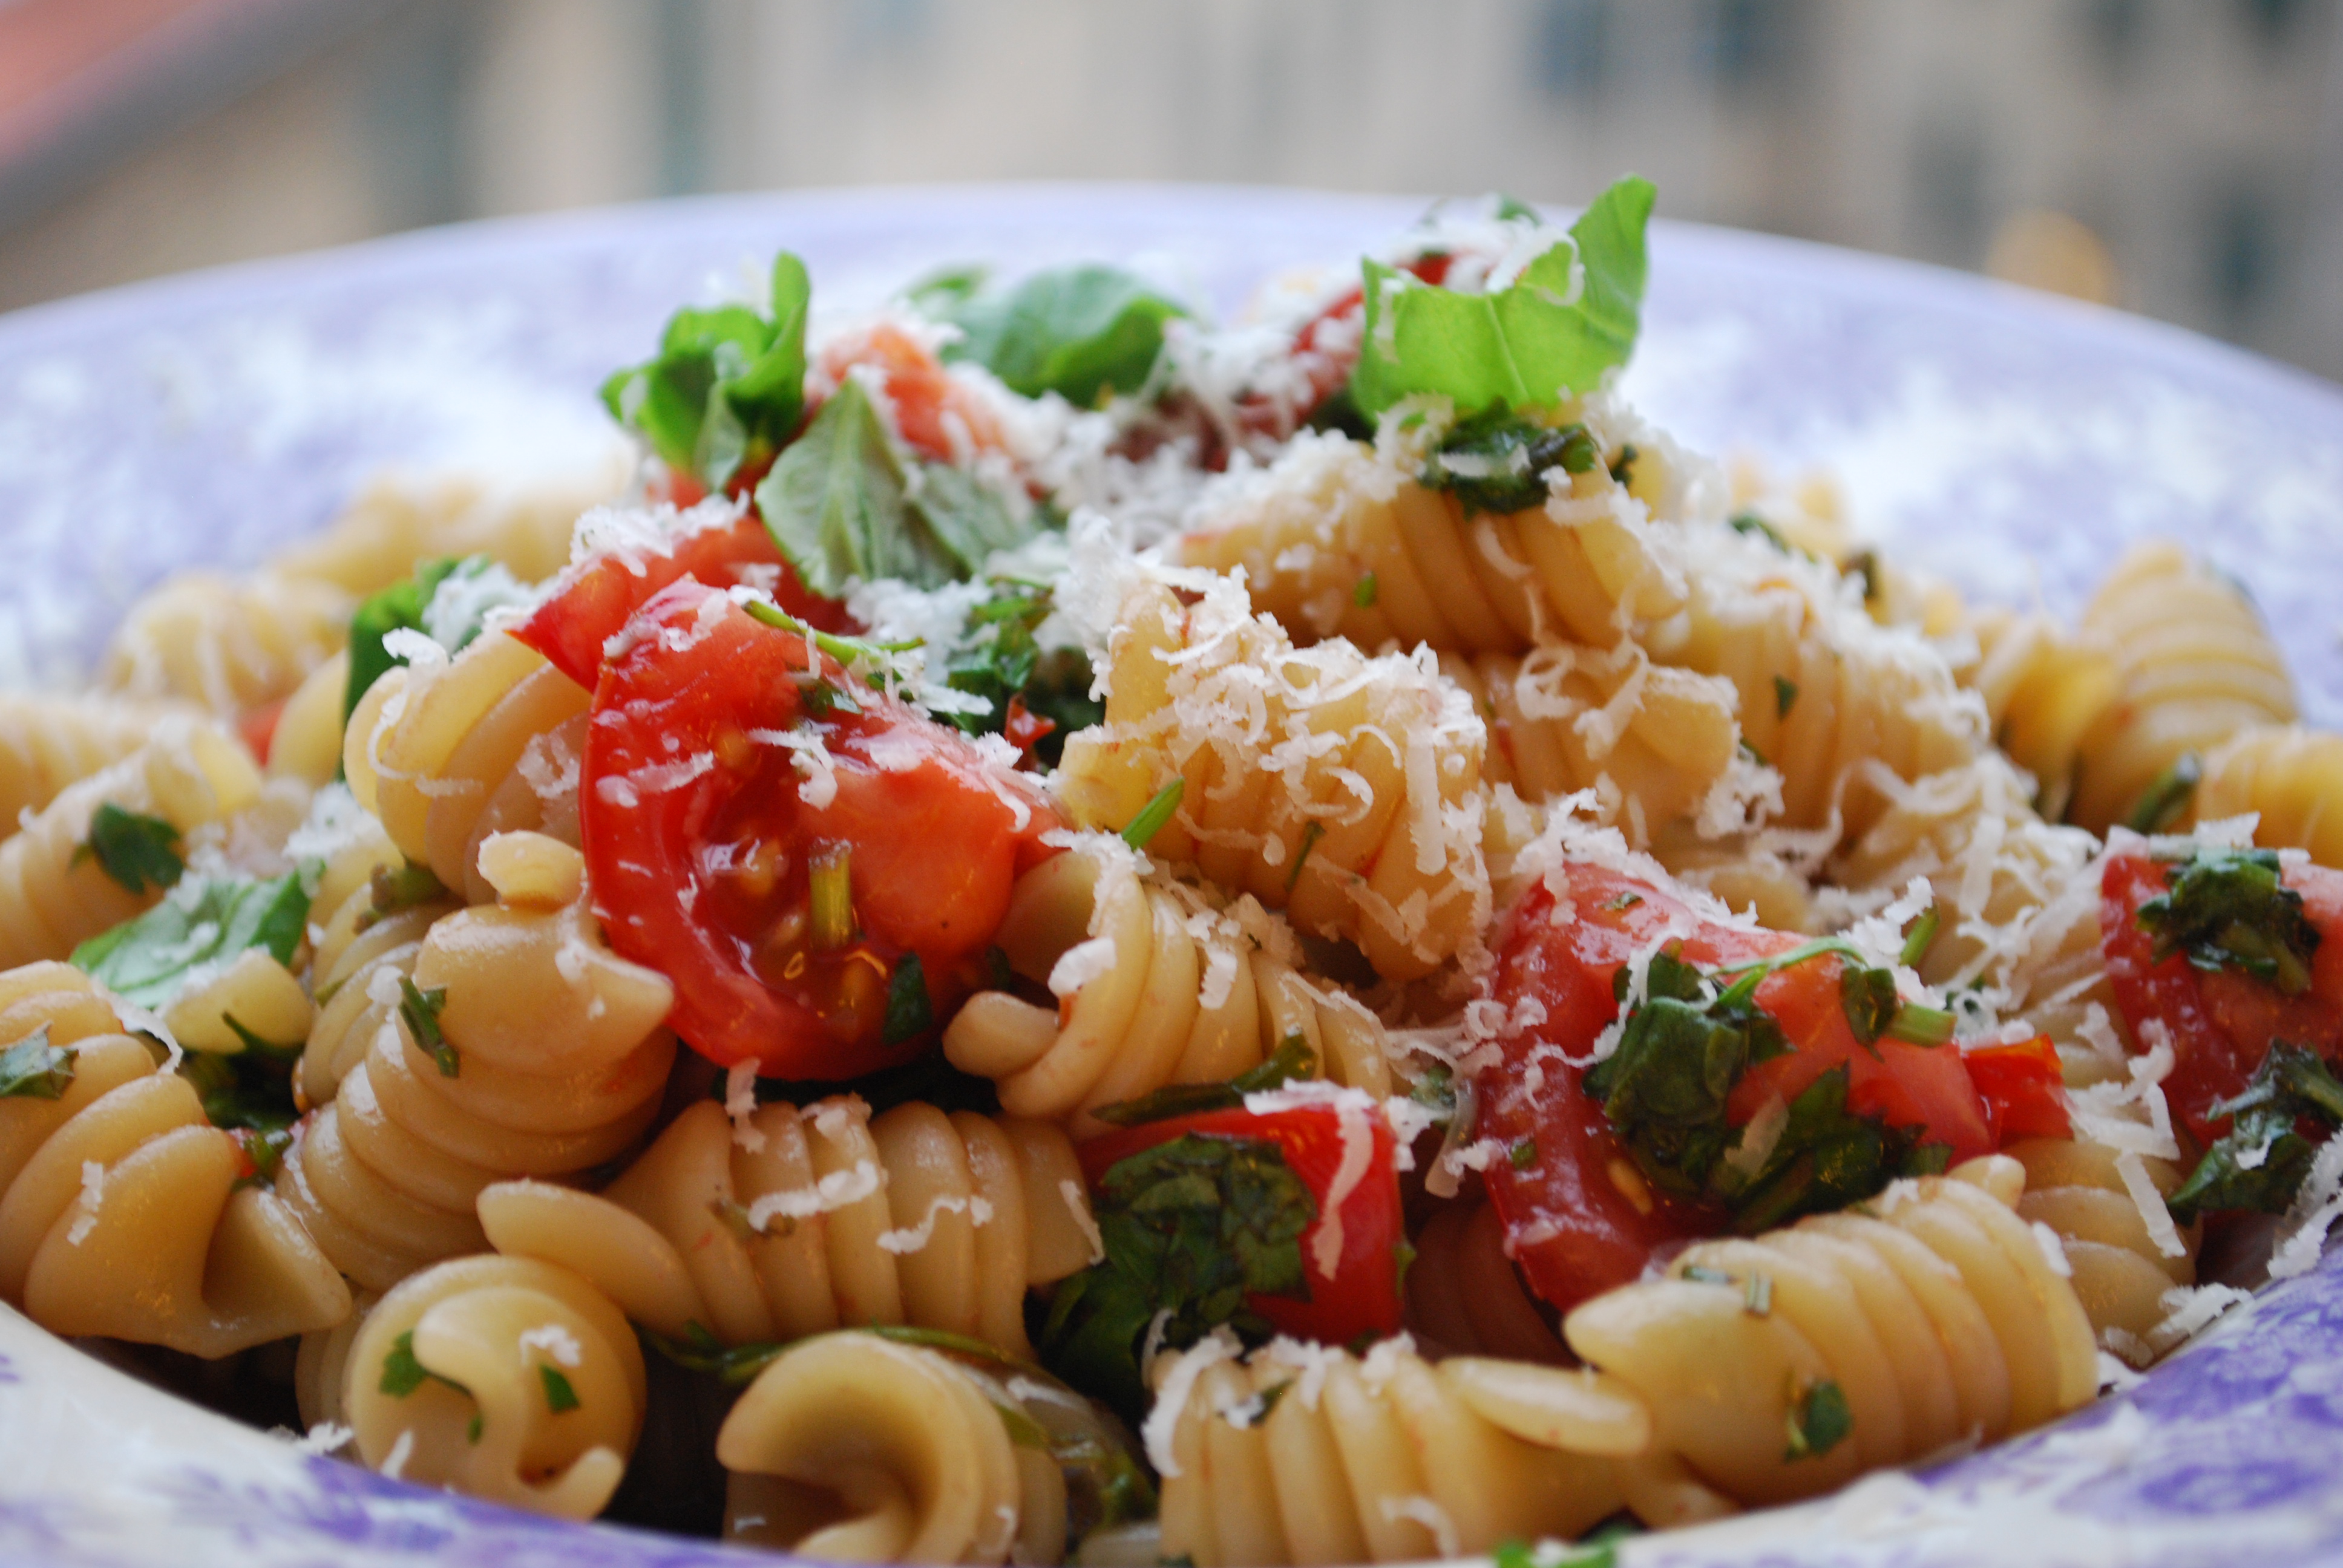 Warm pasta salad with tomatoes and herbs | Fifth Floor Cooking